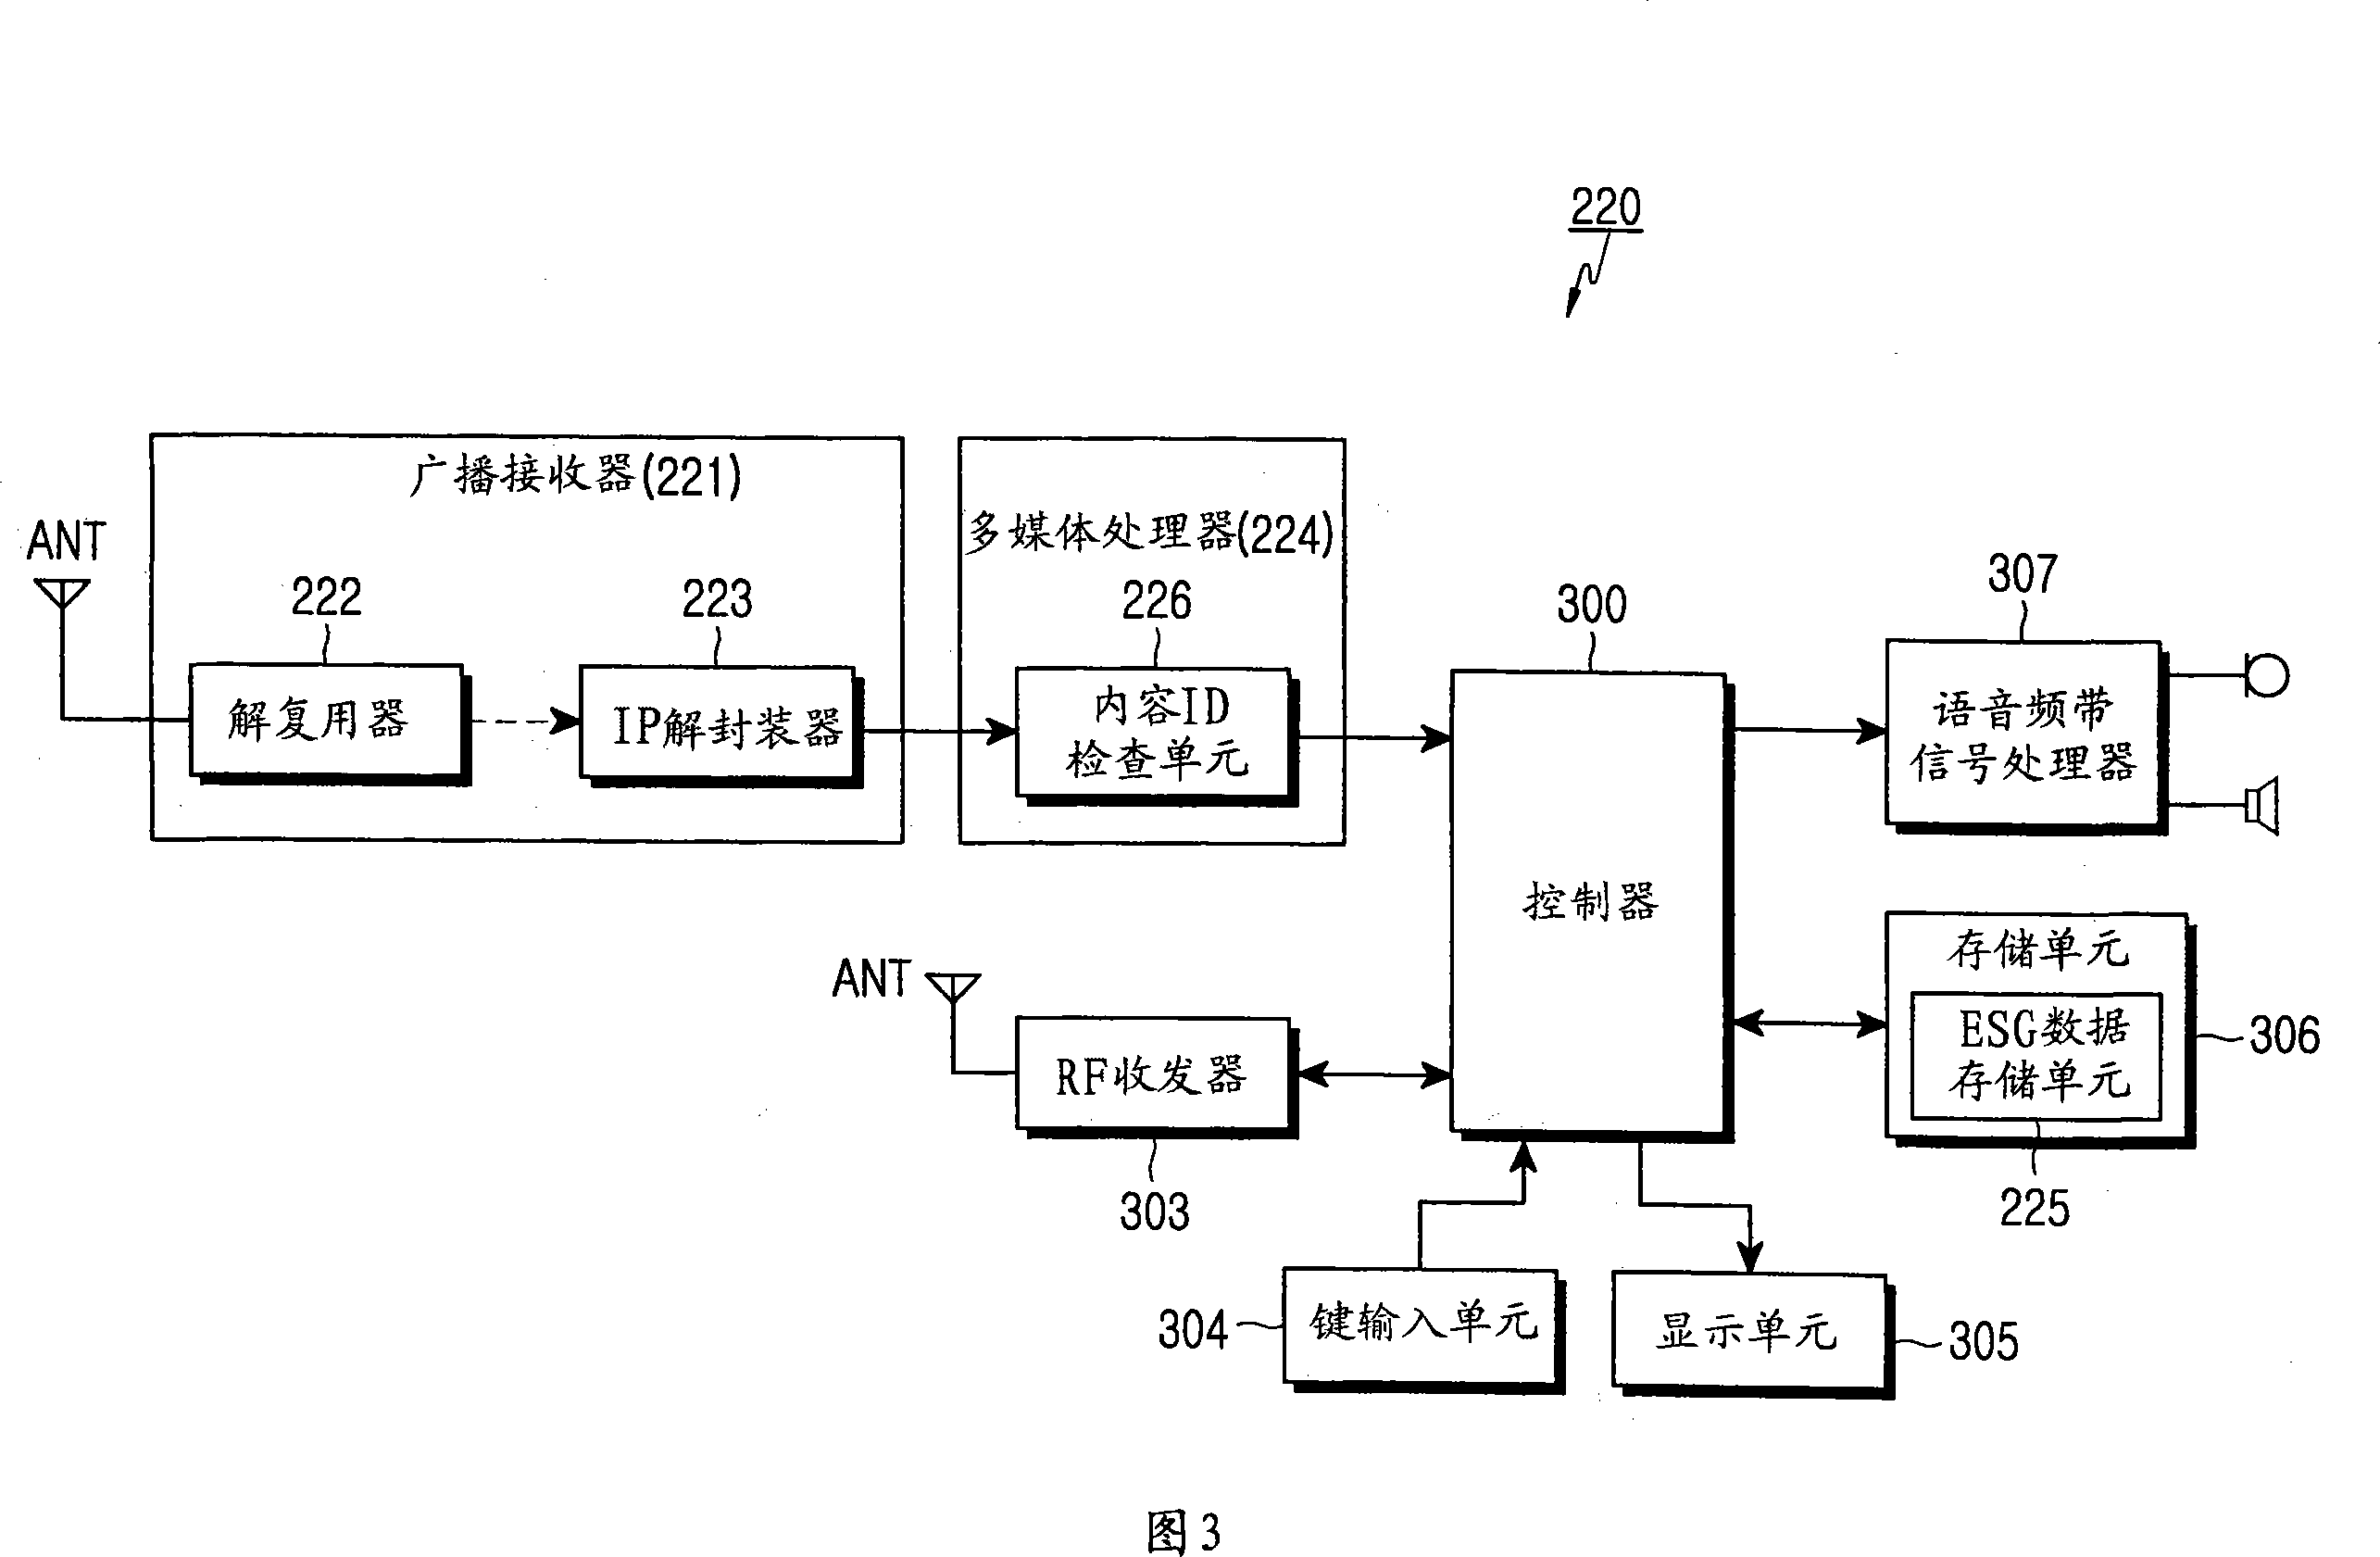 System for providing broadcasting content information and method for providing broadcasting service in the system